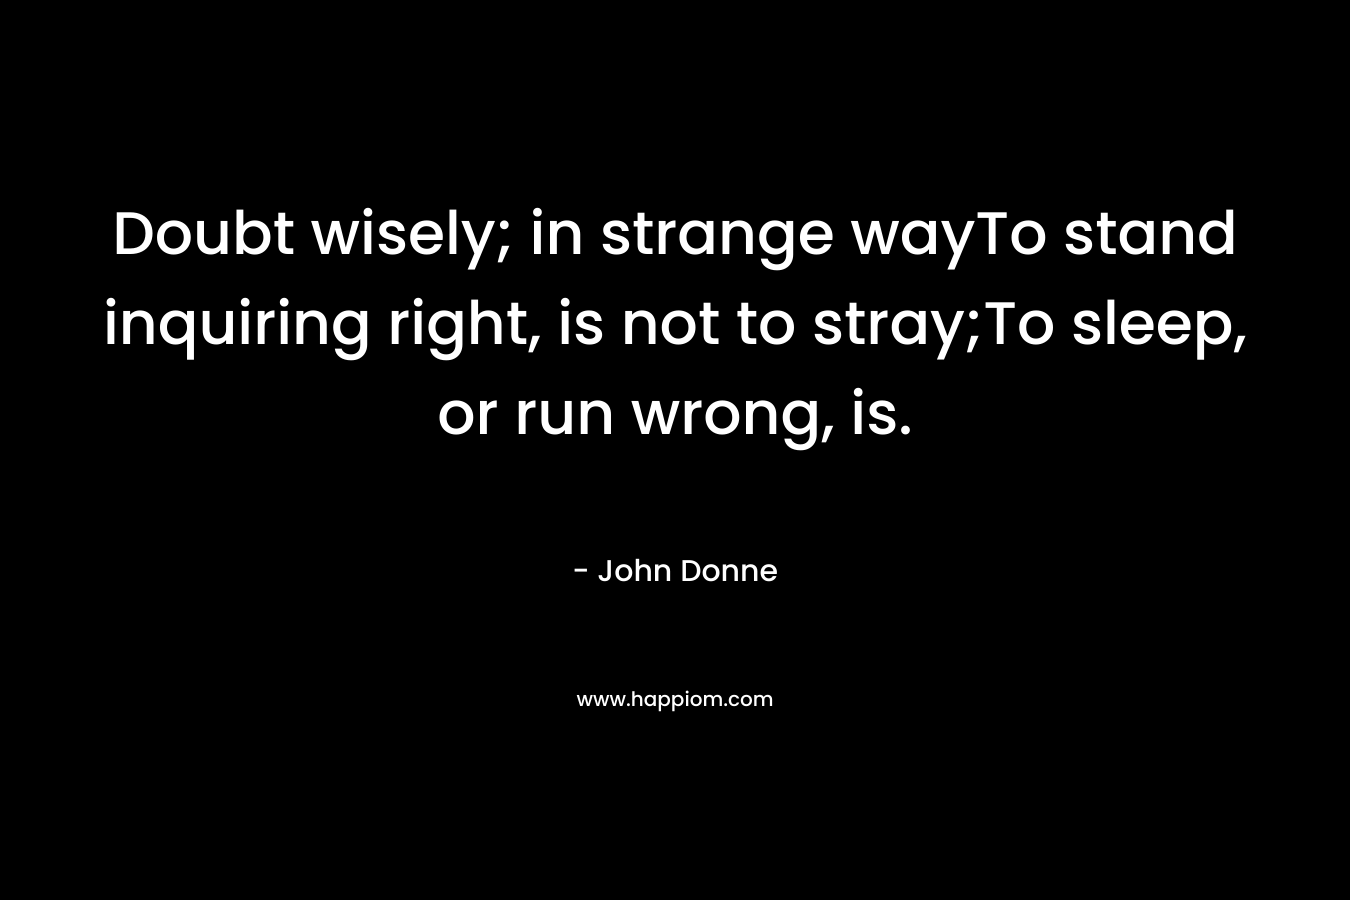 Doubt wisely; in strange wayTo stand inquiring right, is not to stray;To sleep, or run wrong, is.